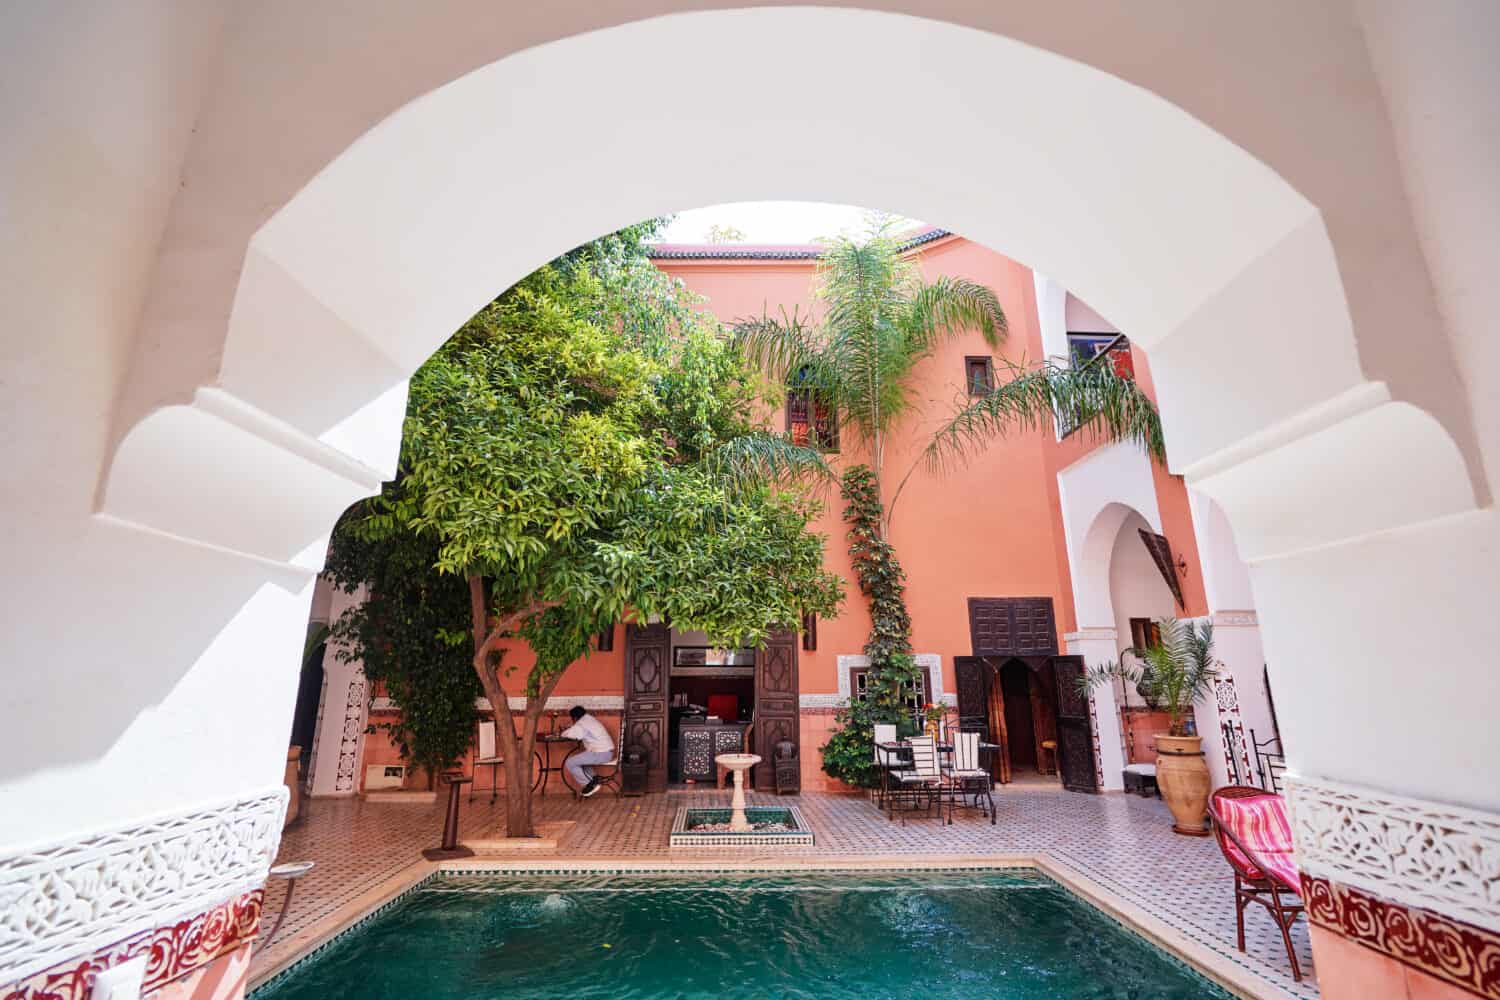 Oriental hospitality. Traveling by Morocco. Relaxing in festive moroccan traditional riad interior with swimming pool.